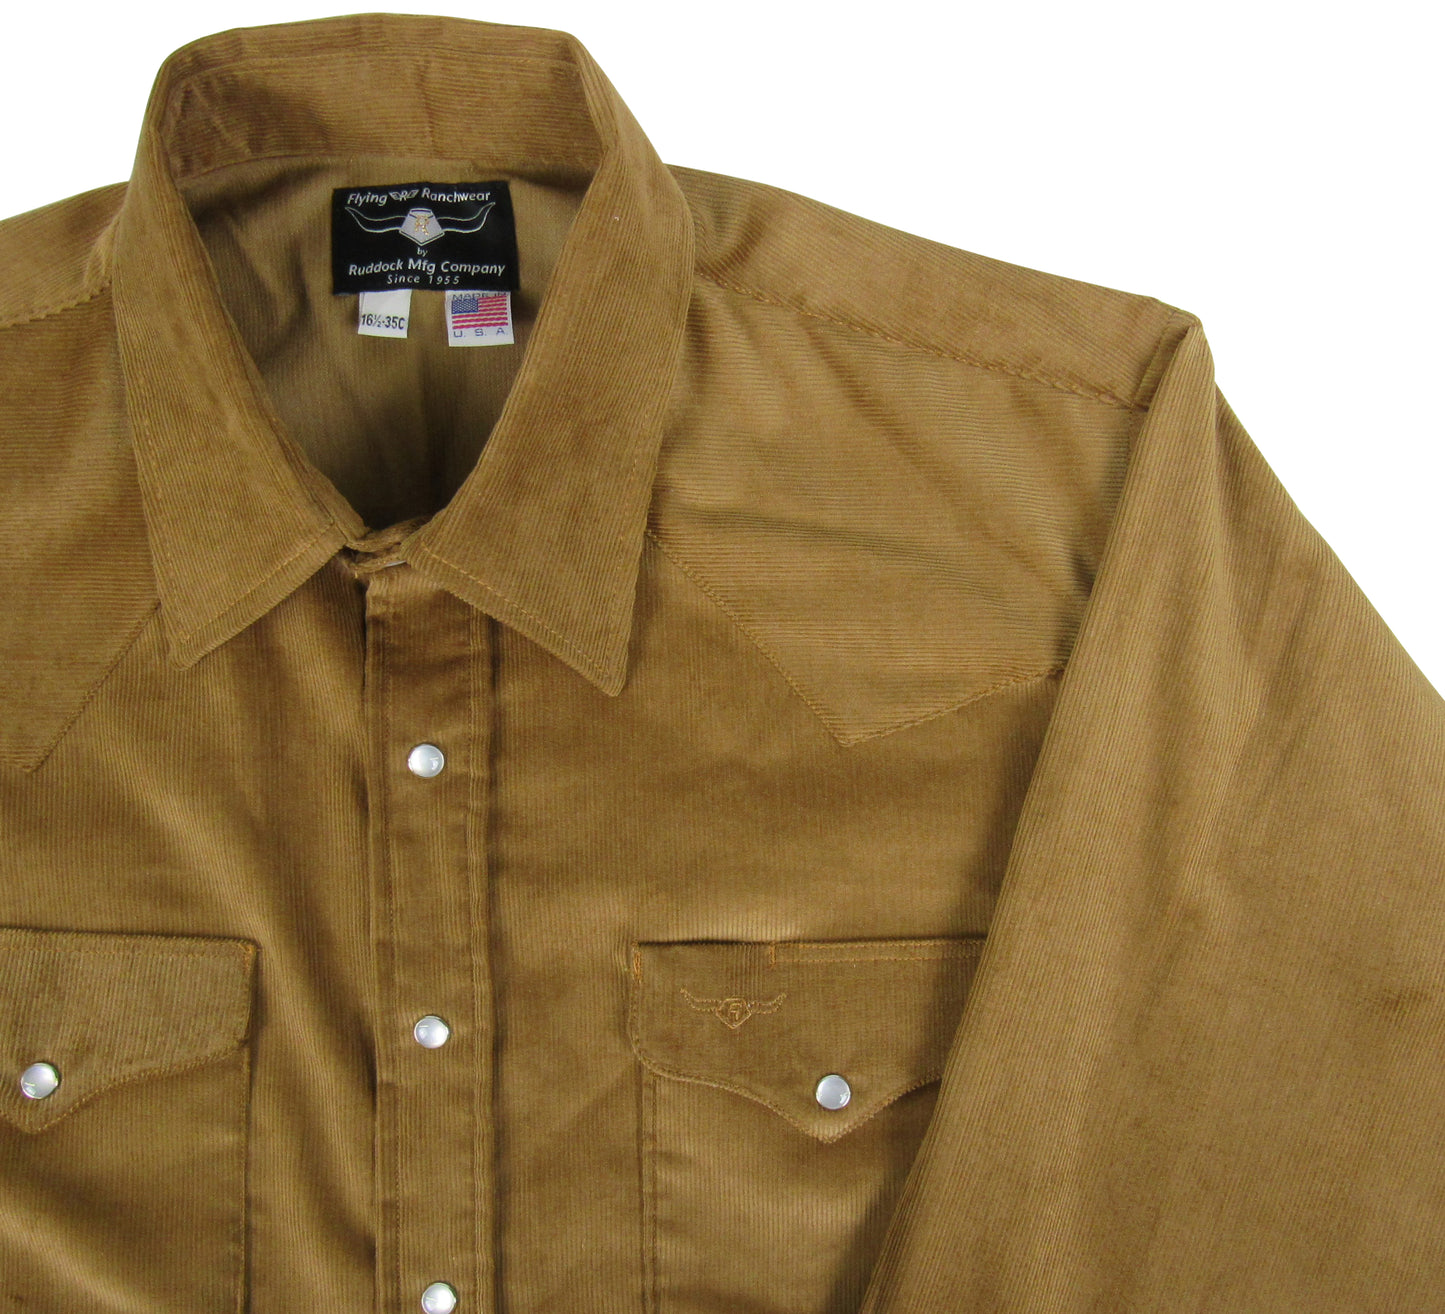 Made in USA pinwale buckskin brown corduroy with snaps, available in big and tall sizes, by Flying R Ranchwear Ruddock Shirts